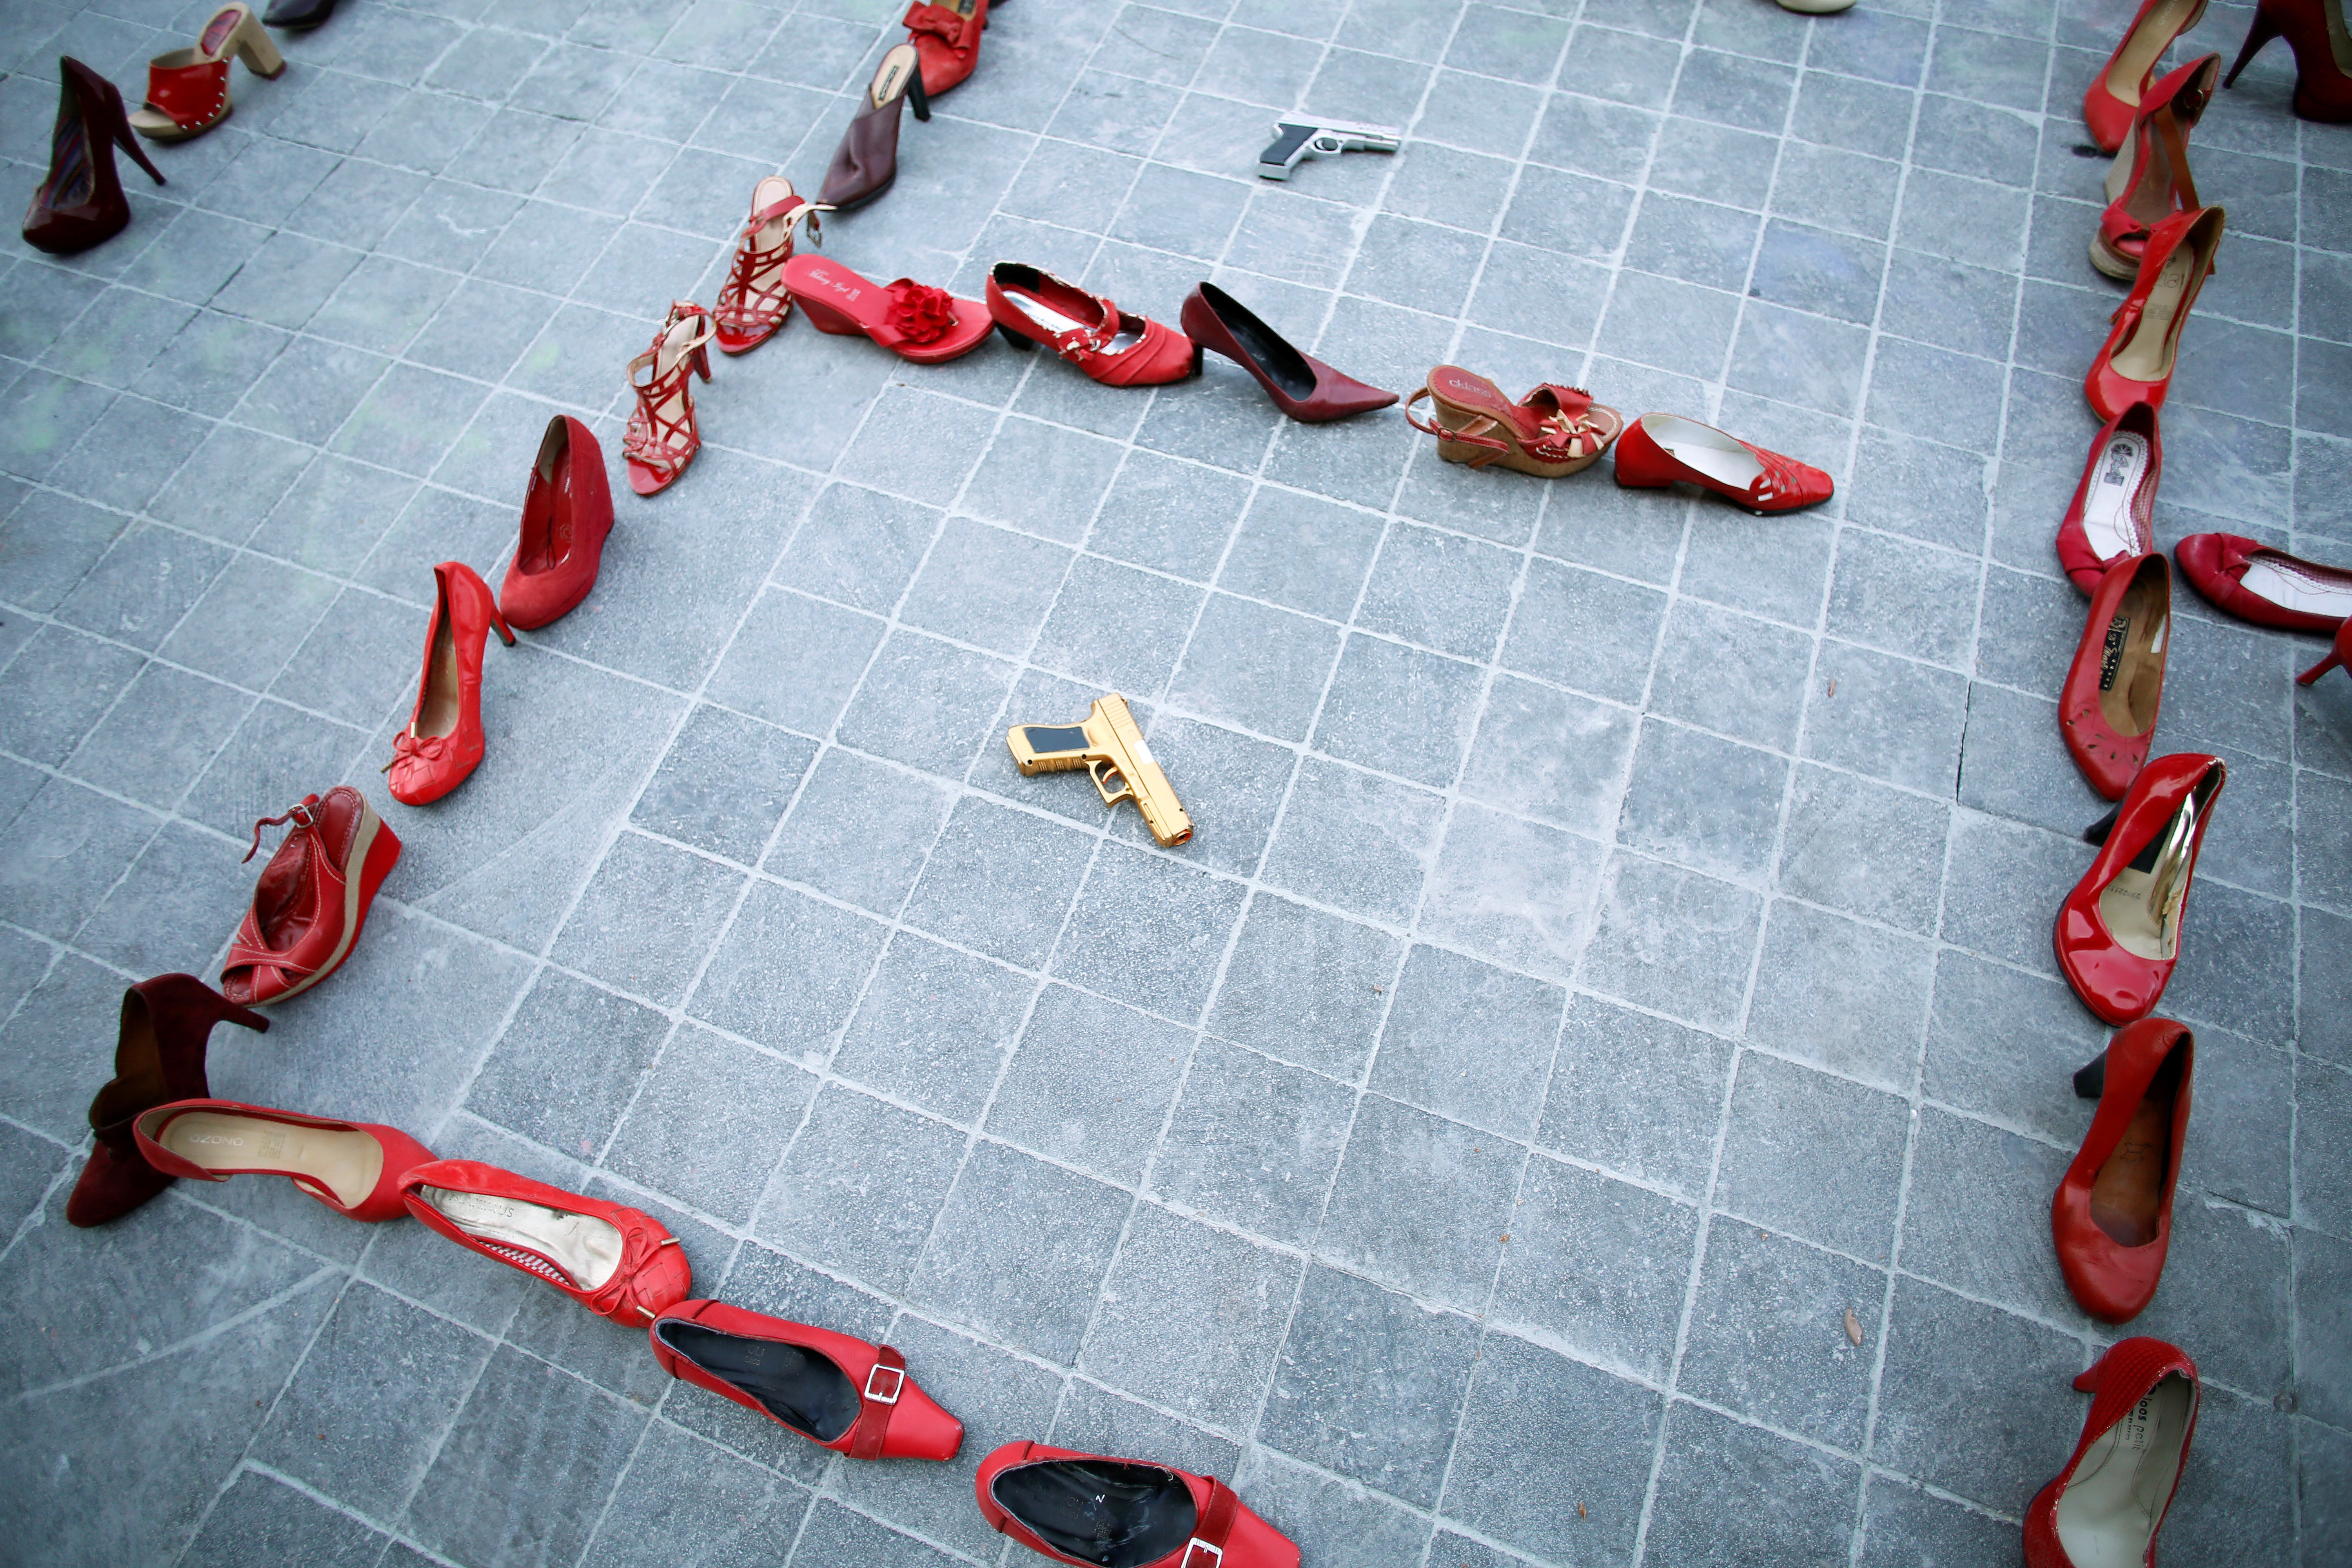 Pairs of women's red shoes are displayed next to a toy gun during the 'Day without women' protest. (Reuters Photo)